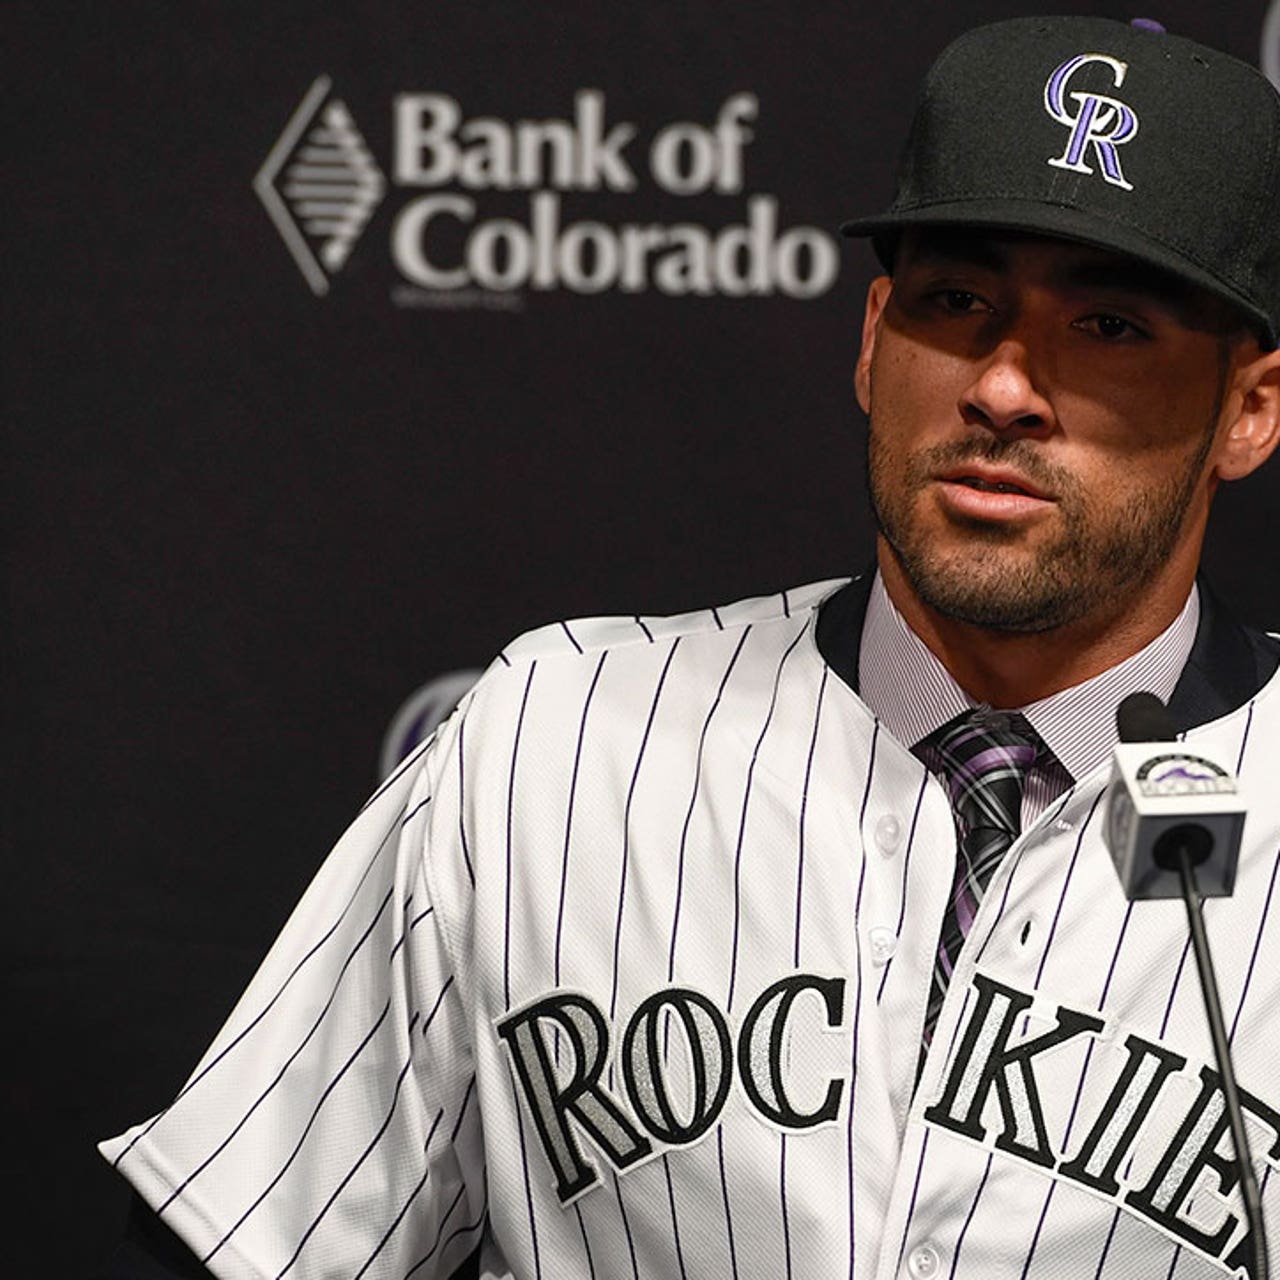 Next stop on Ian Desmond's journey is first base for the Rockies